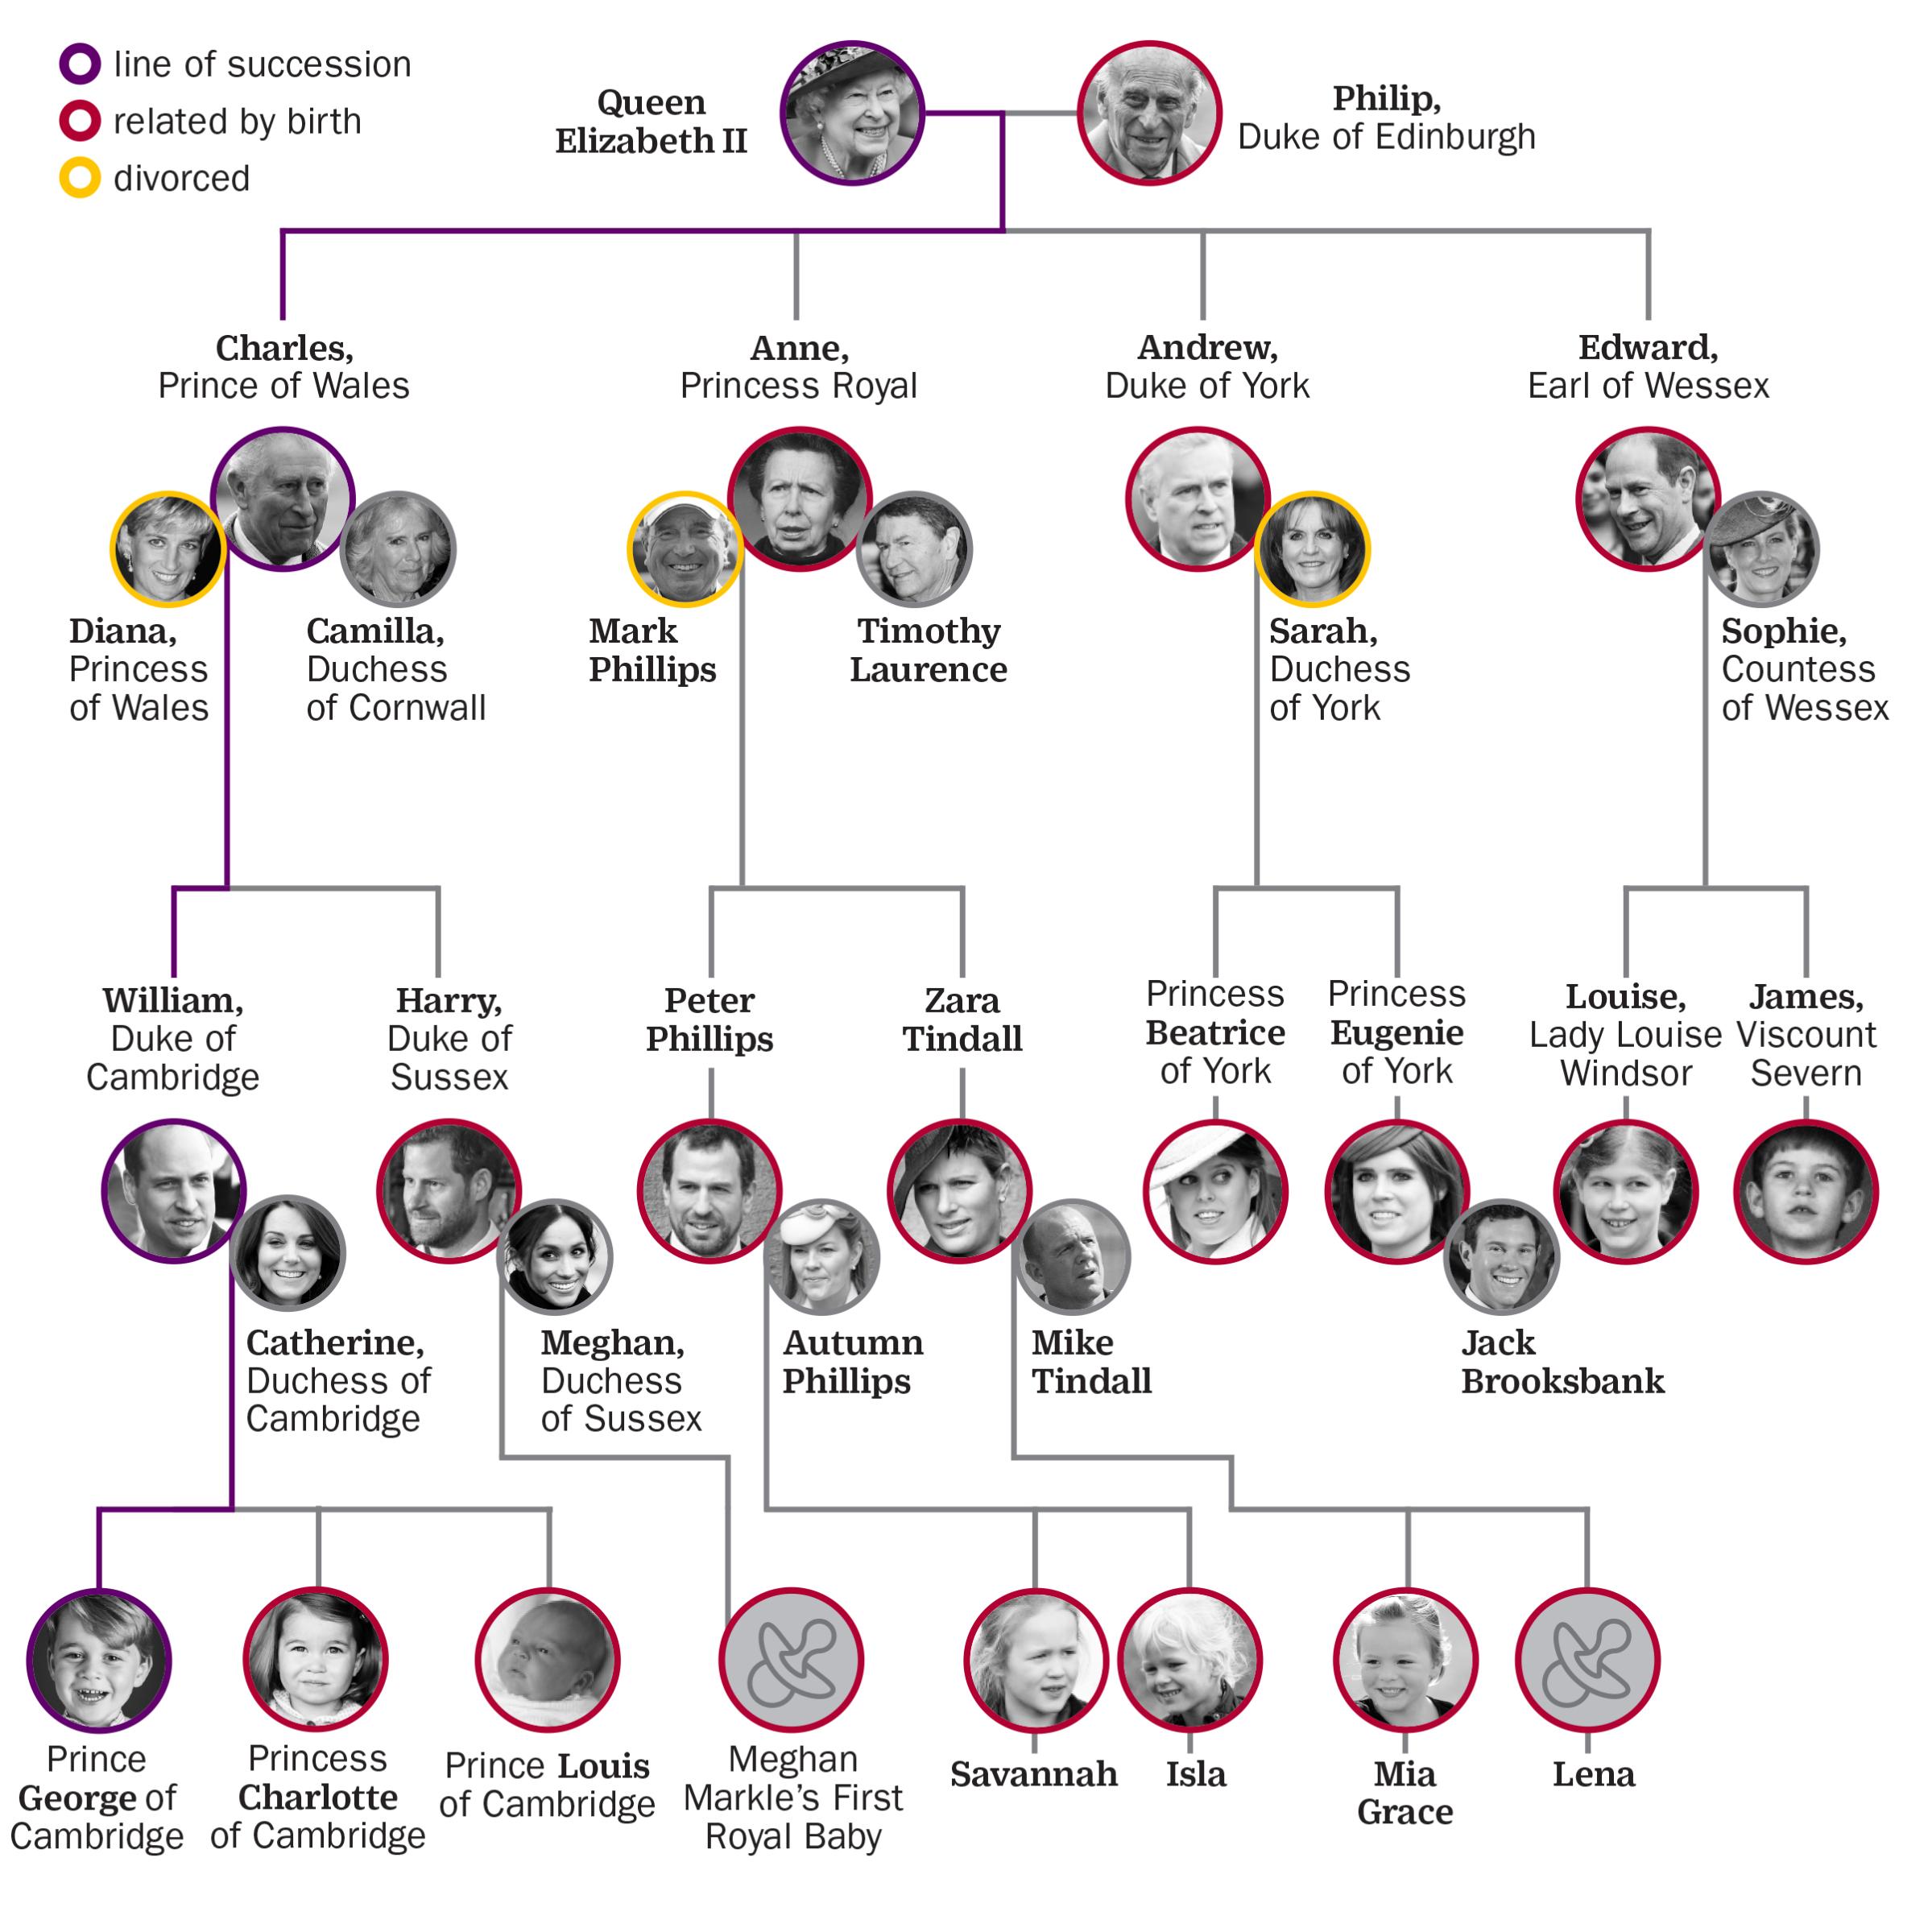 Where is the royal baby in the royal family's line of succession